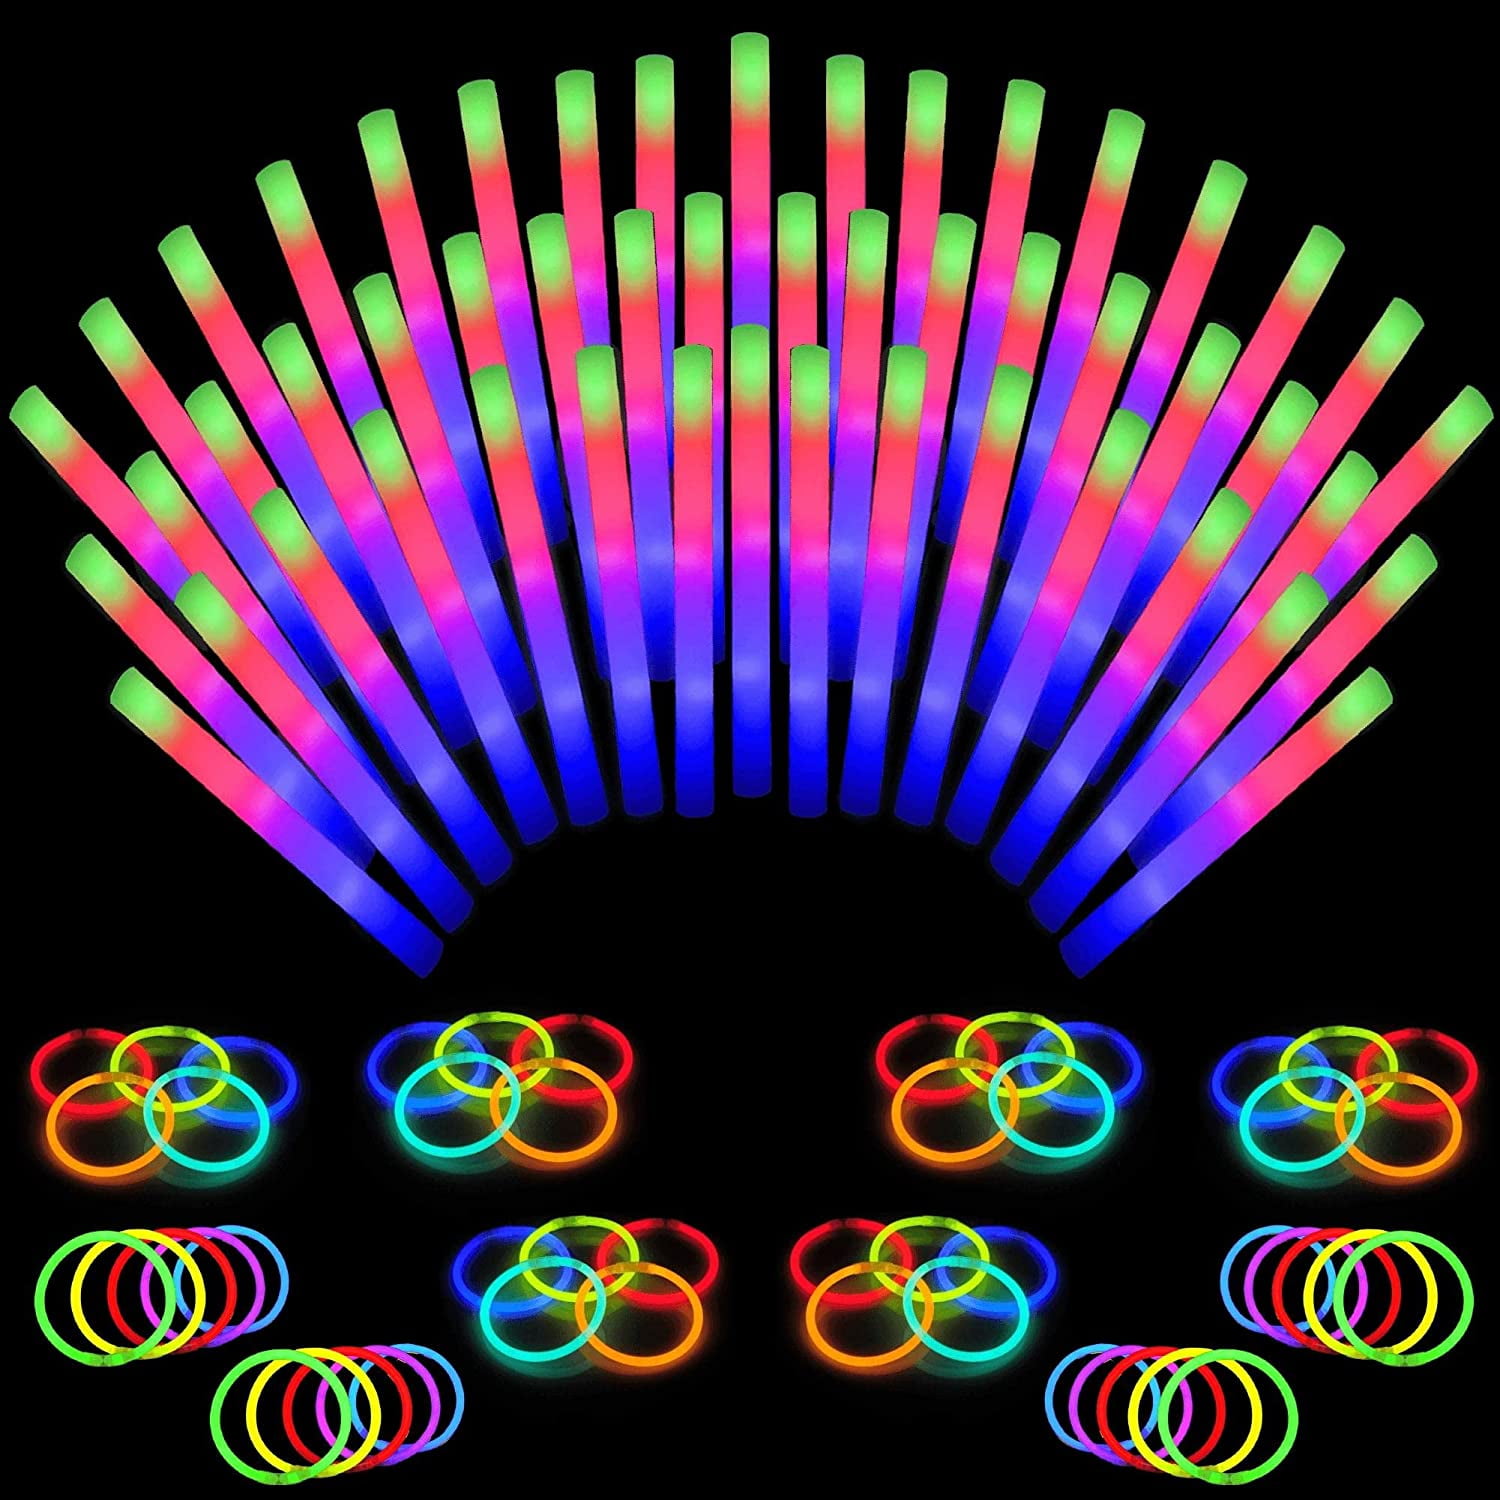 Gazdag)Light up Foam Sticks 20pcs LED Foam Sticks Halloween Party Favors  Glow Batons with 3 Modes Flashing Effect for Party, Concert and Event. 